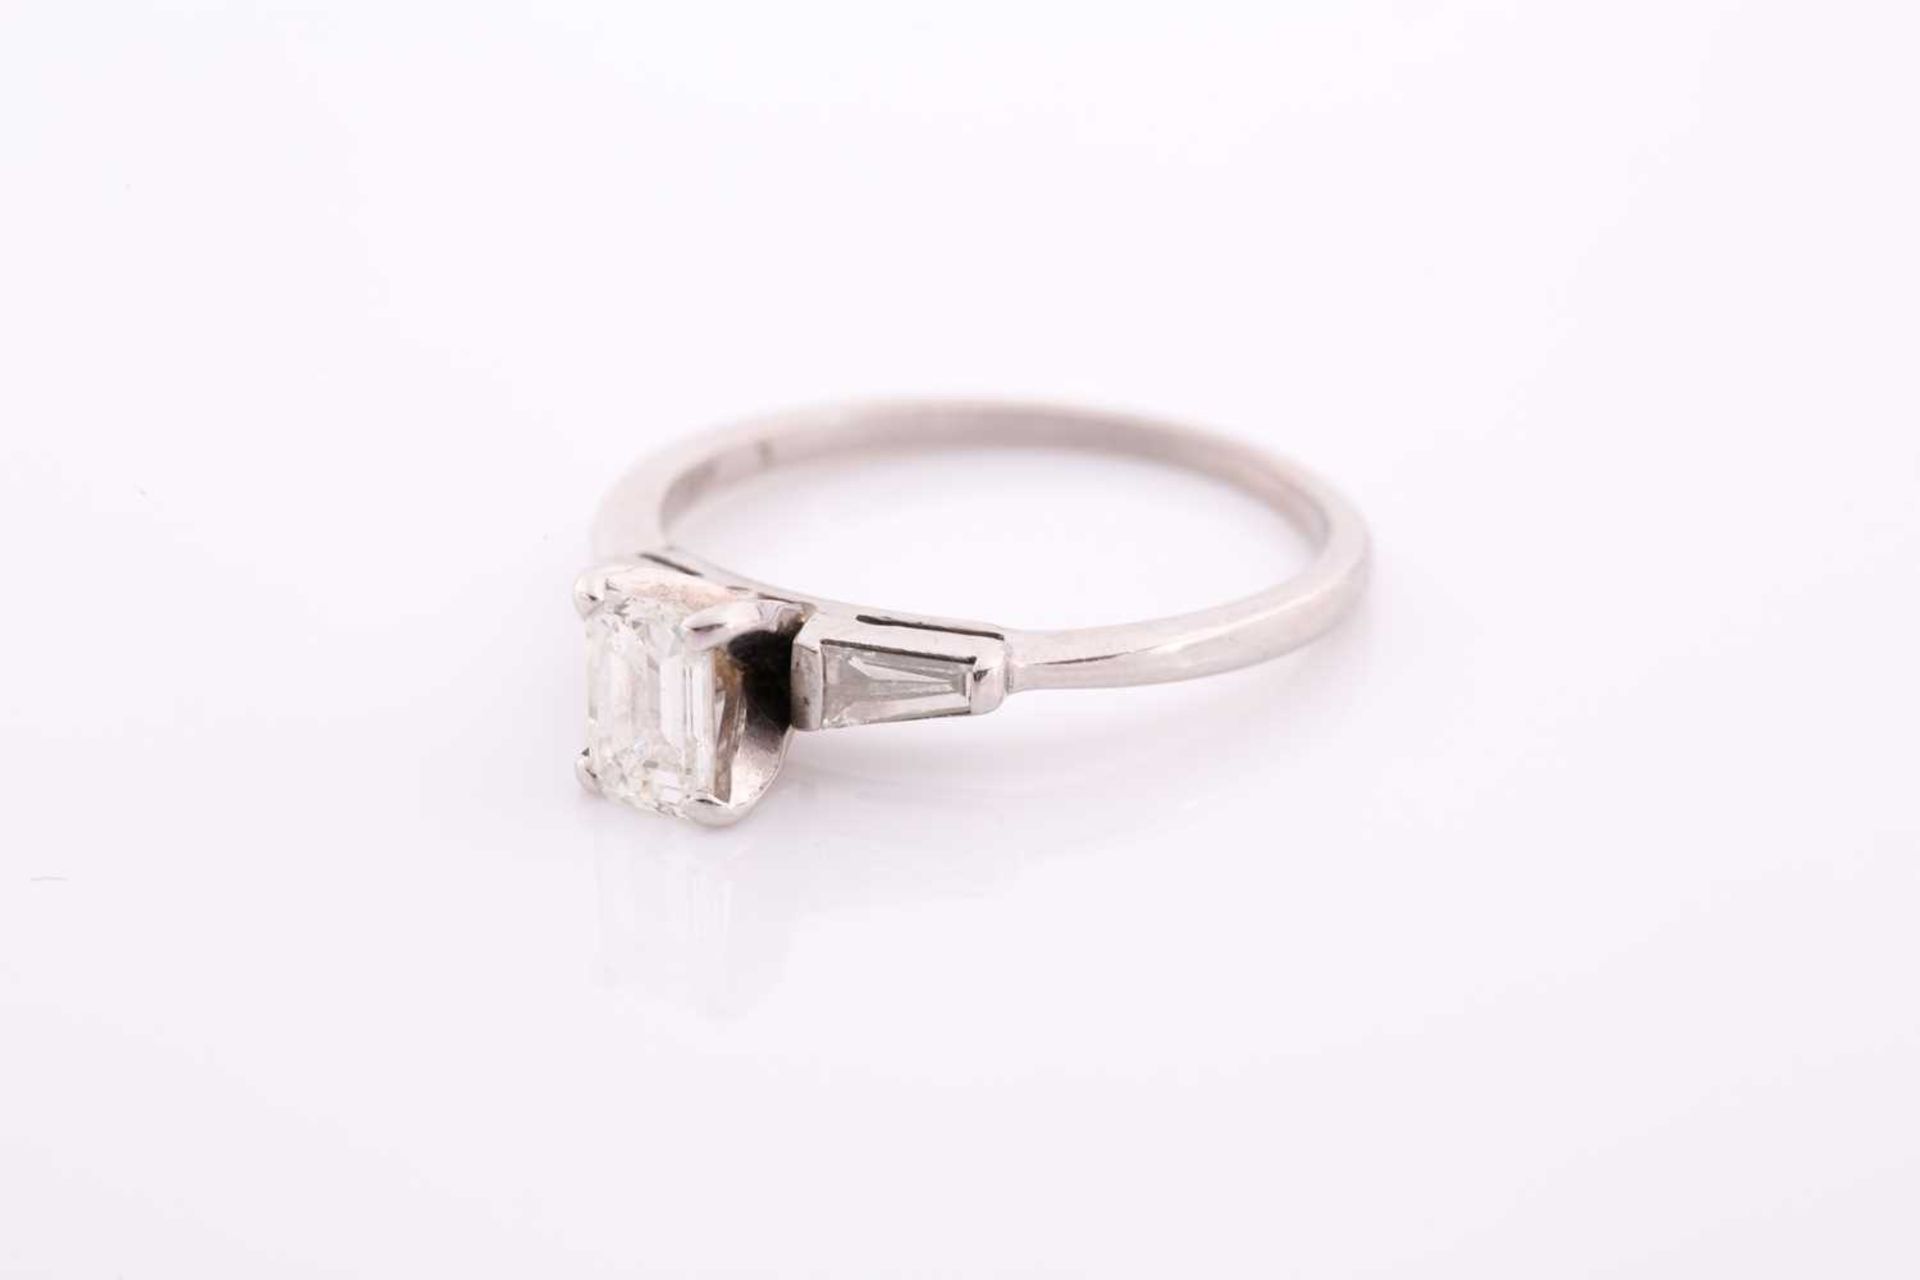 An 18ct white gold and diamond ring, set with an emerald-cut diamond of approximately 0.60 carats, - Image 3 of 4